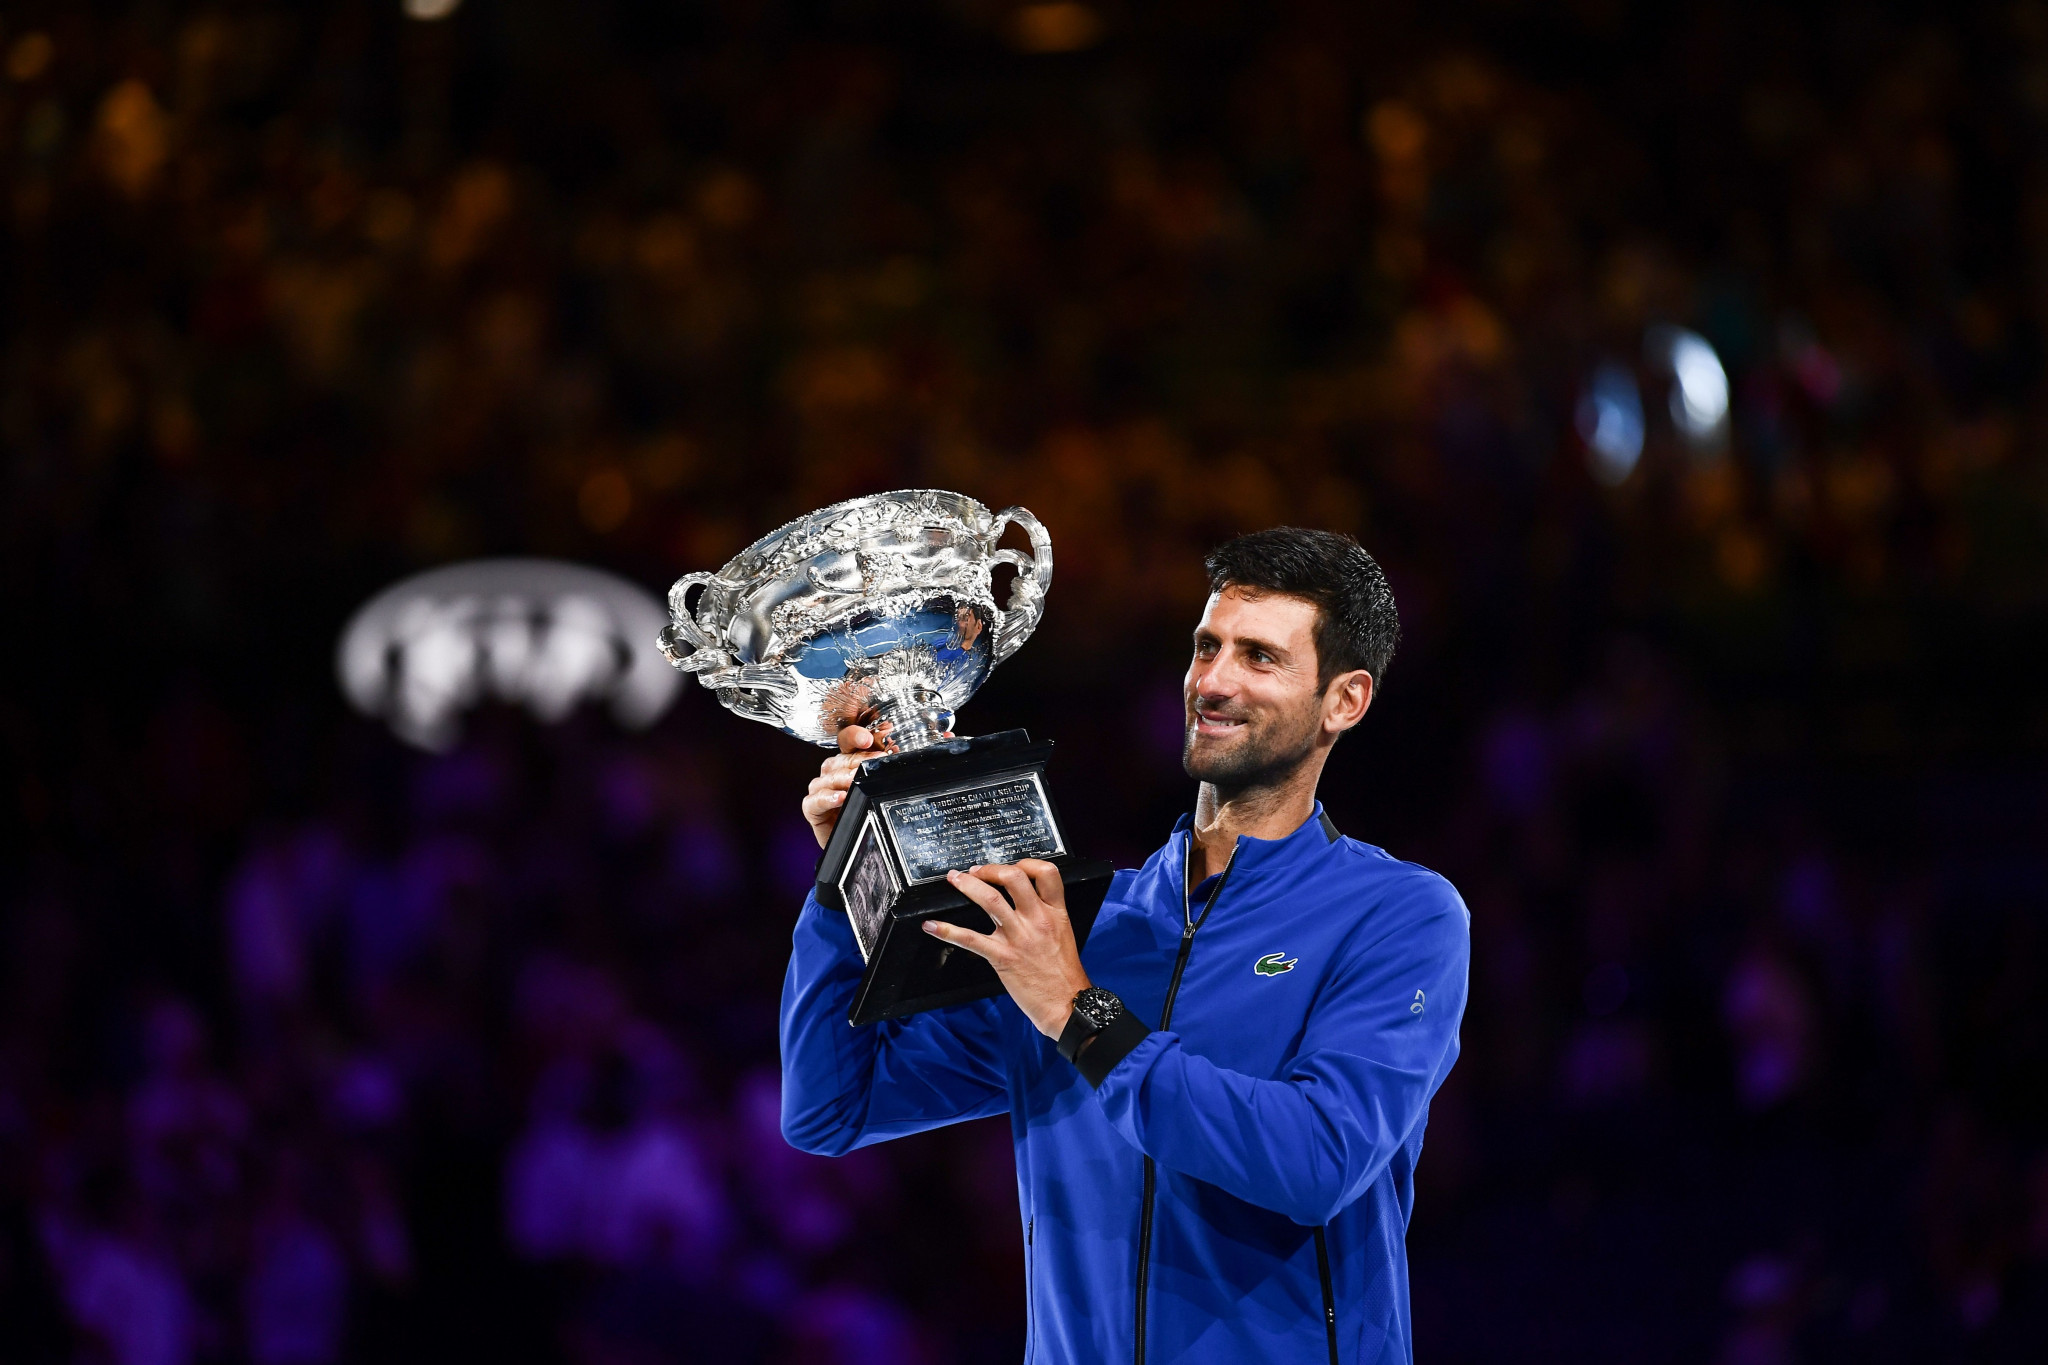 Novak Djokovic claimed his seventh Australian Open title with victory over Rafael Nadal ©Getty Images